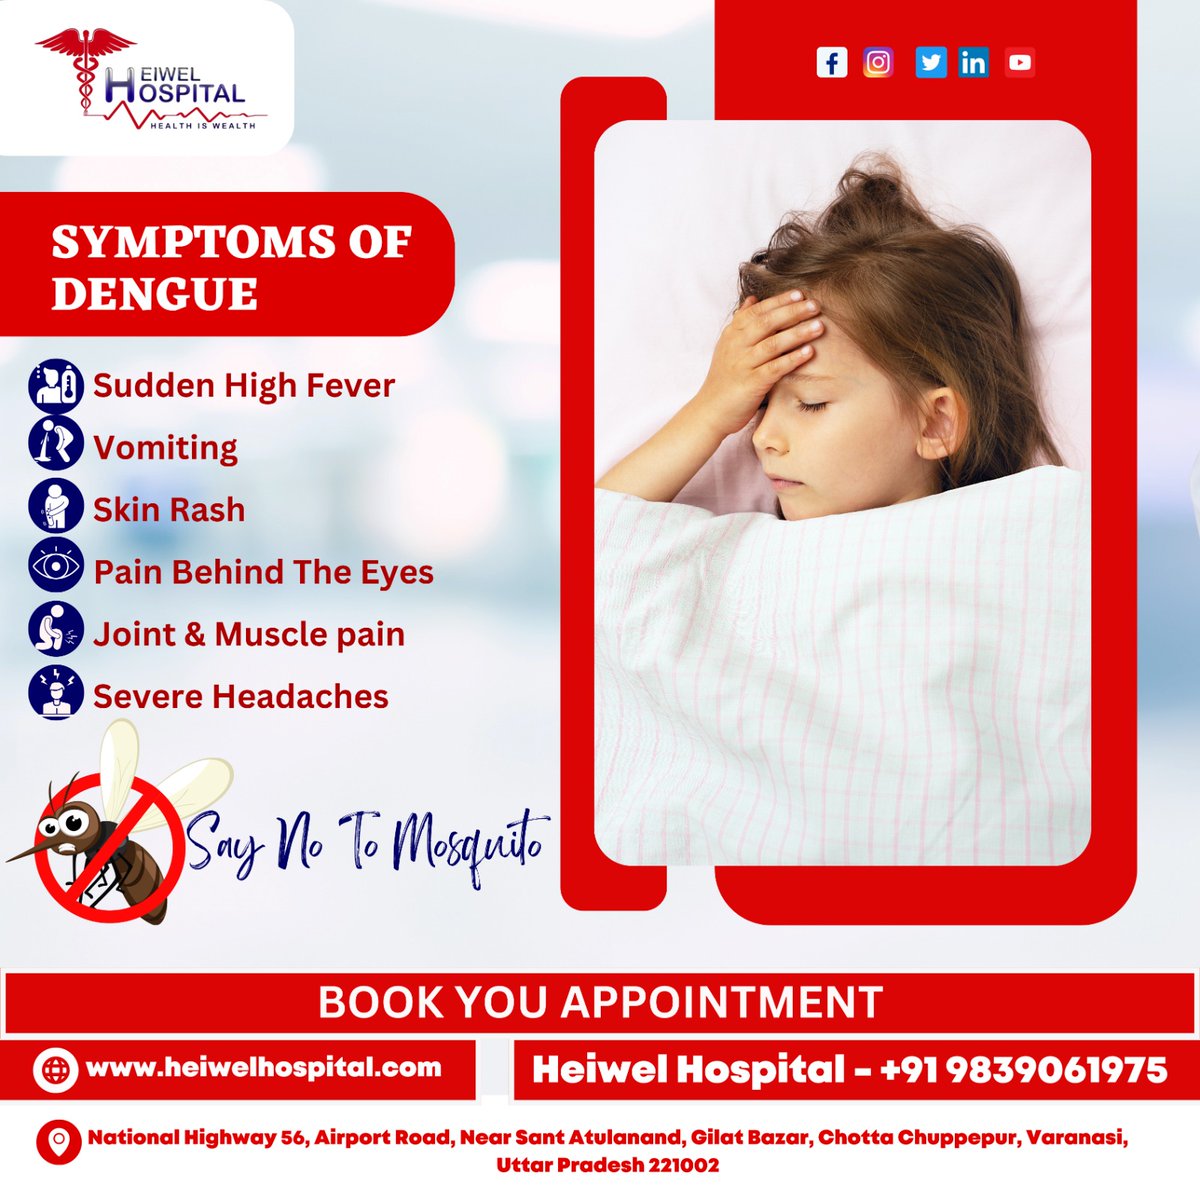 Beware!
Viral Fever is going viral📷
visit now:
📷 संपर्क करे : 9839061975.
:
:
:
#heiwelhospital #HealthyVision #hospital #doctor #ambulanceavailable #femaleinfertility #bestinfertilityspecialist #MultispecialityHospital #24x7care #besthospitalinvaranasi #healthcareservices